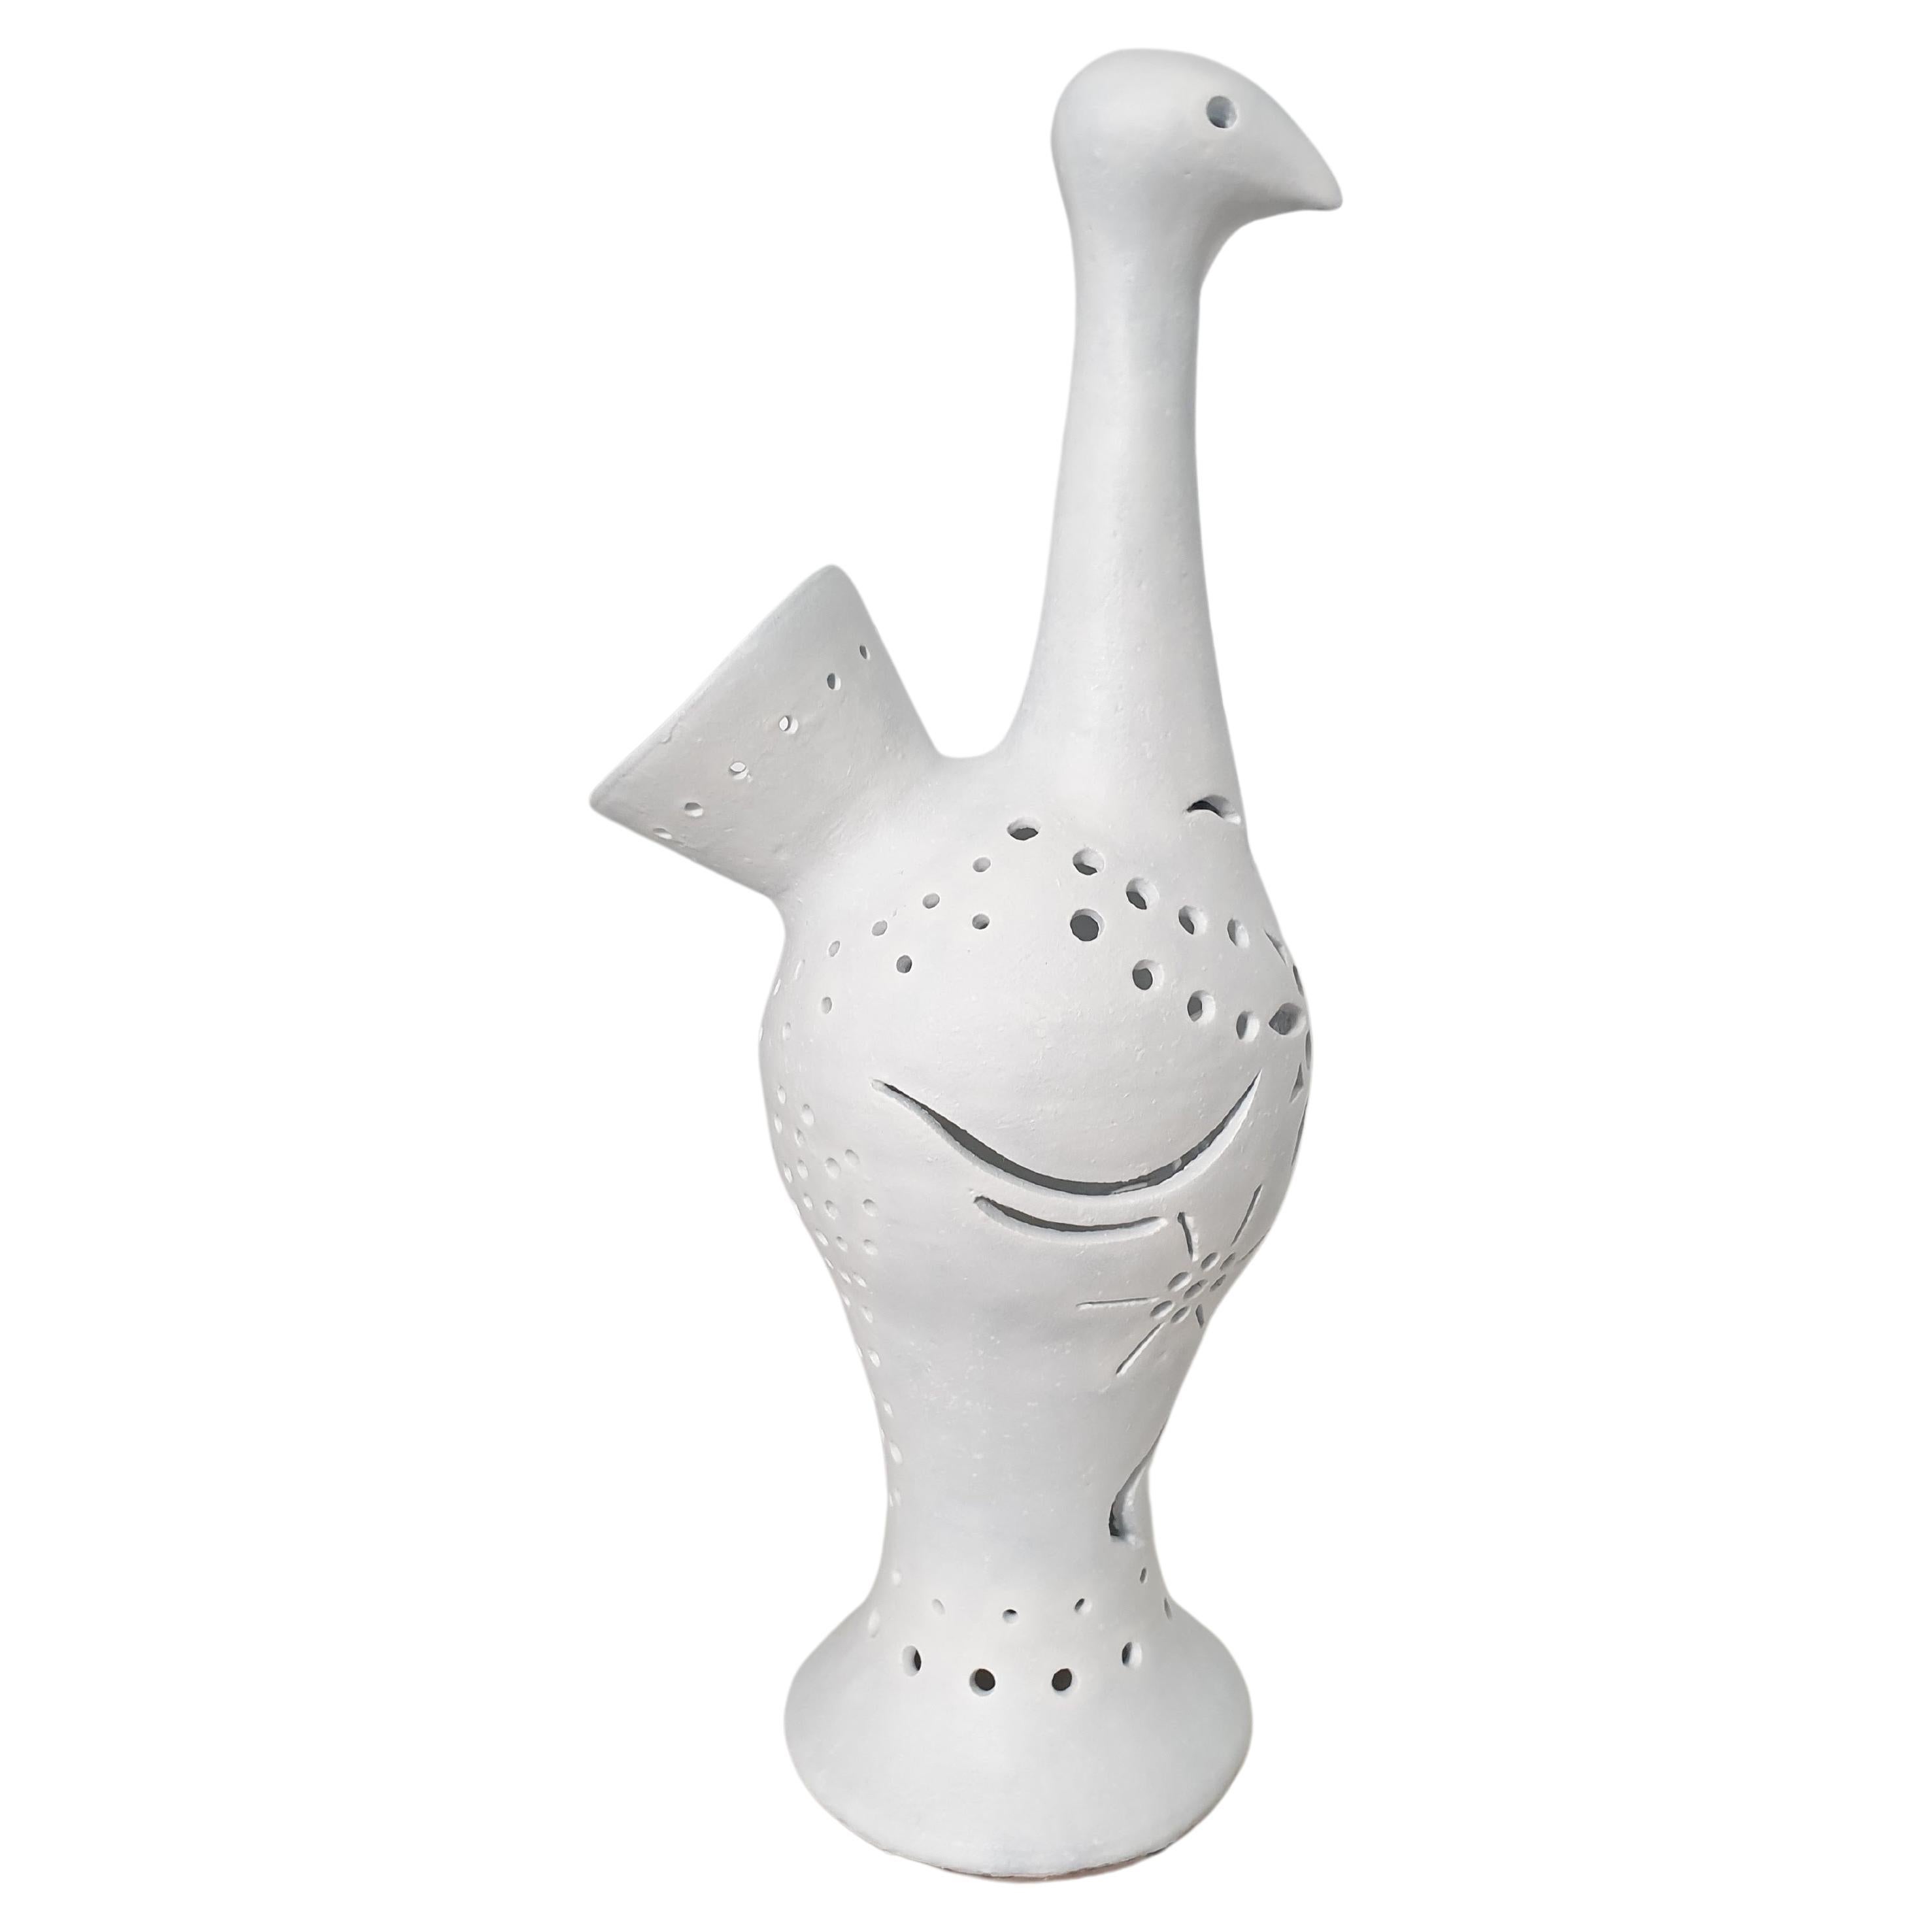 Large and imposing French white matt glazed ceramic lamp representing a stylized peacock. The lamp is unusual in that the lampholder is inside and the light streams out via the cuts in the surface of the bird. The lamp will be rewired by ourselves